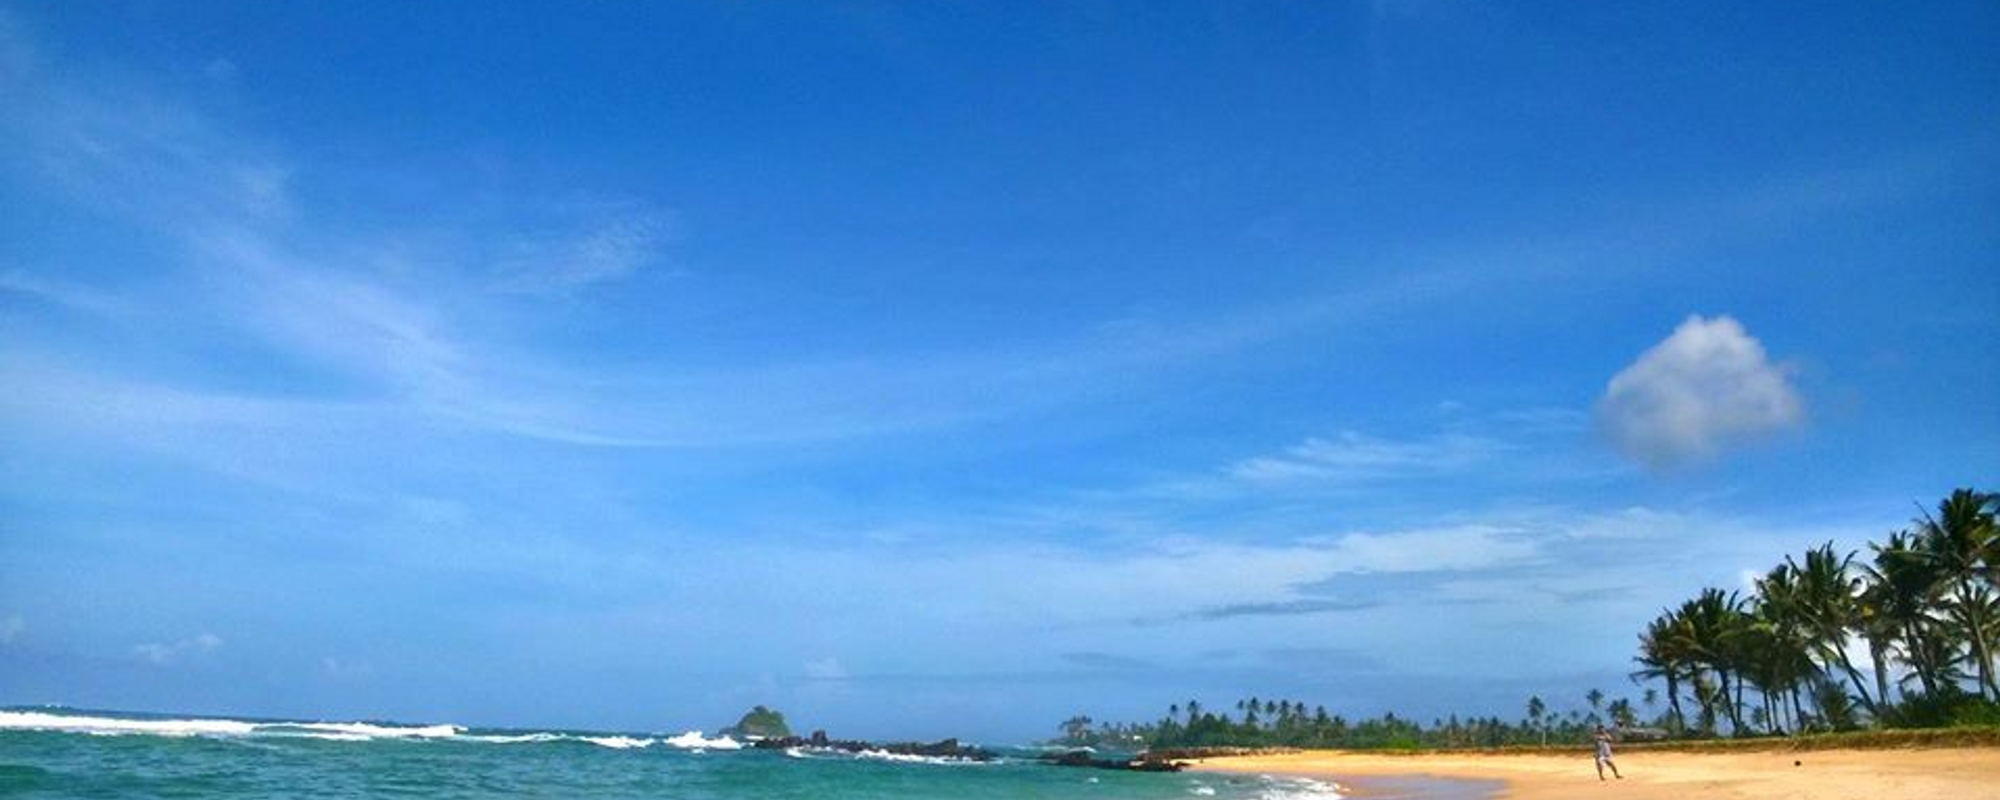 Midigama is the perfect place to enjoy the beauty of a free beach...